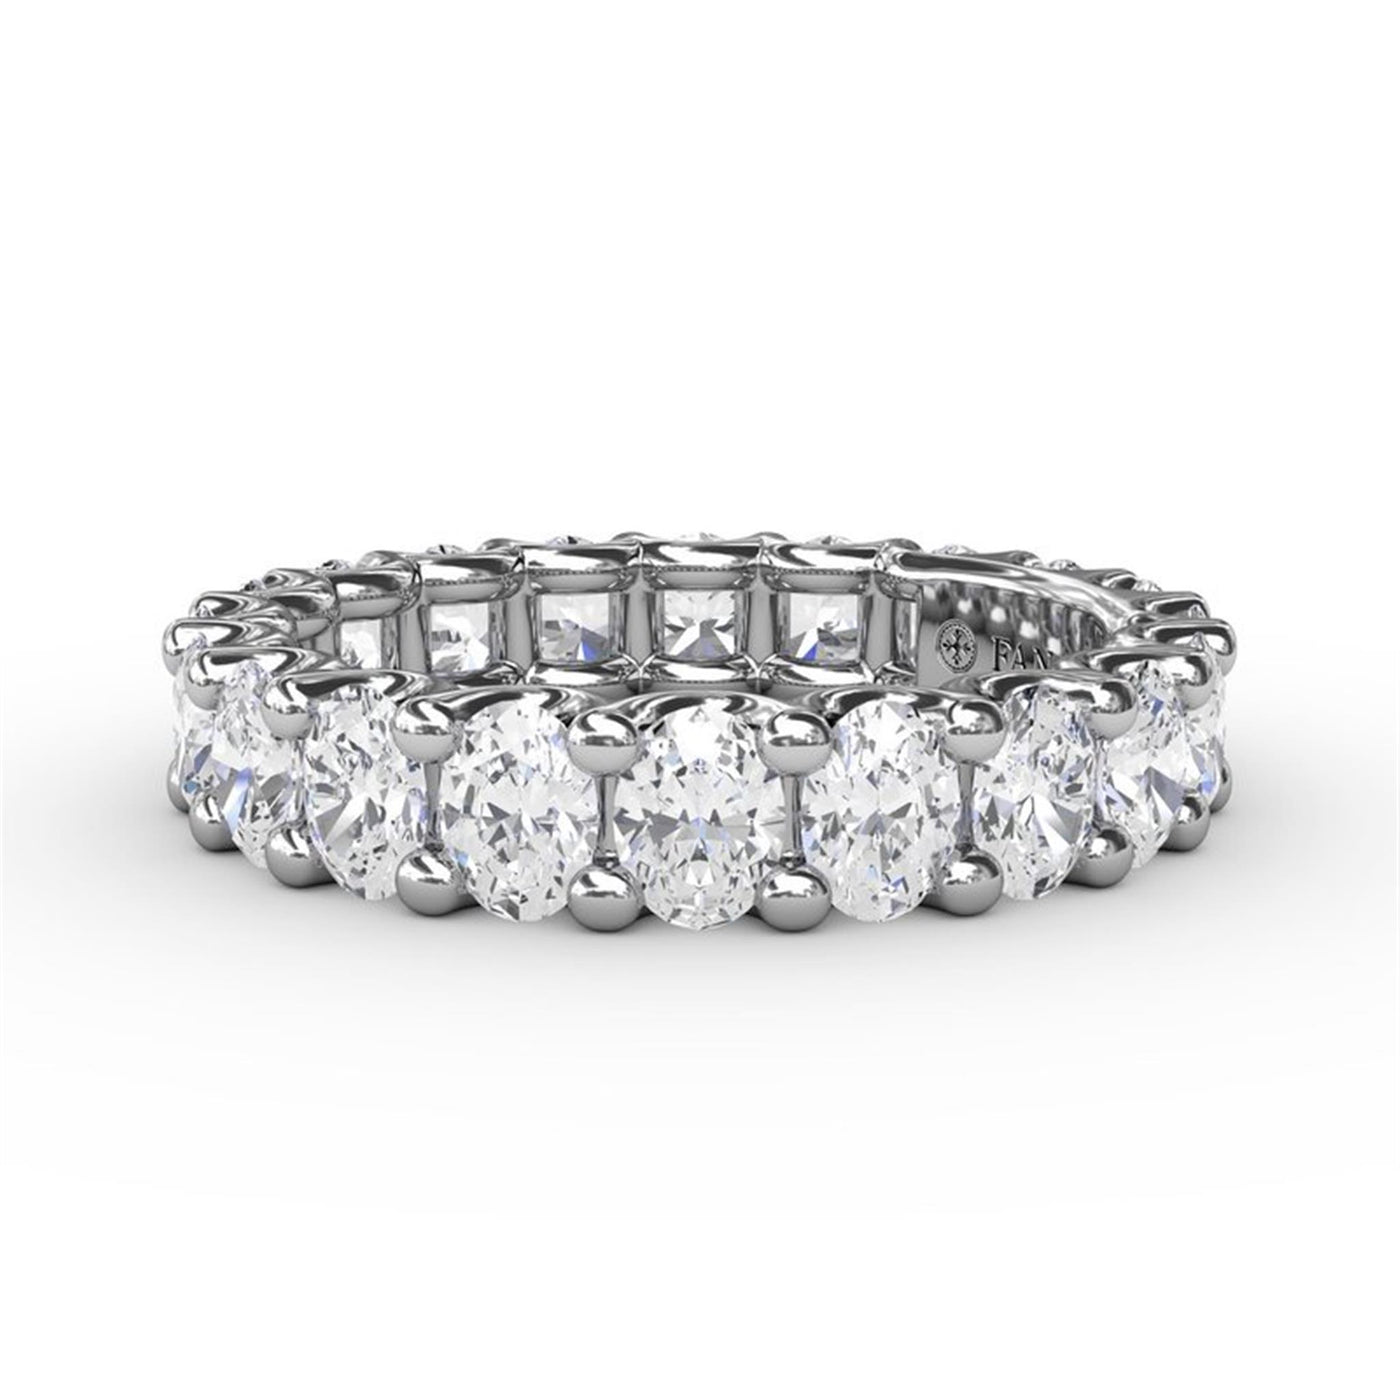 14K White Gold 3.30ctw Diamond Eternity Band 
Featuring a Polished Finish